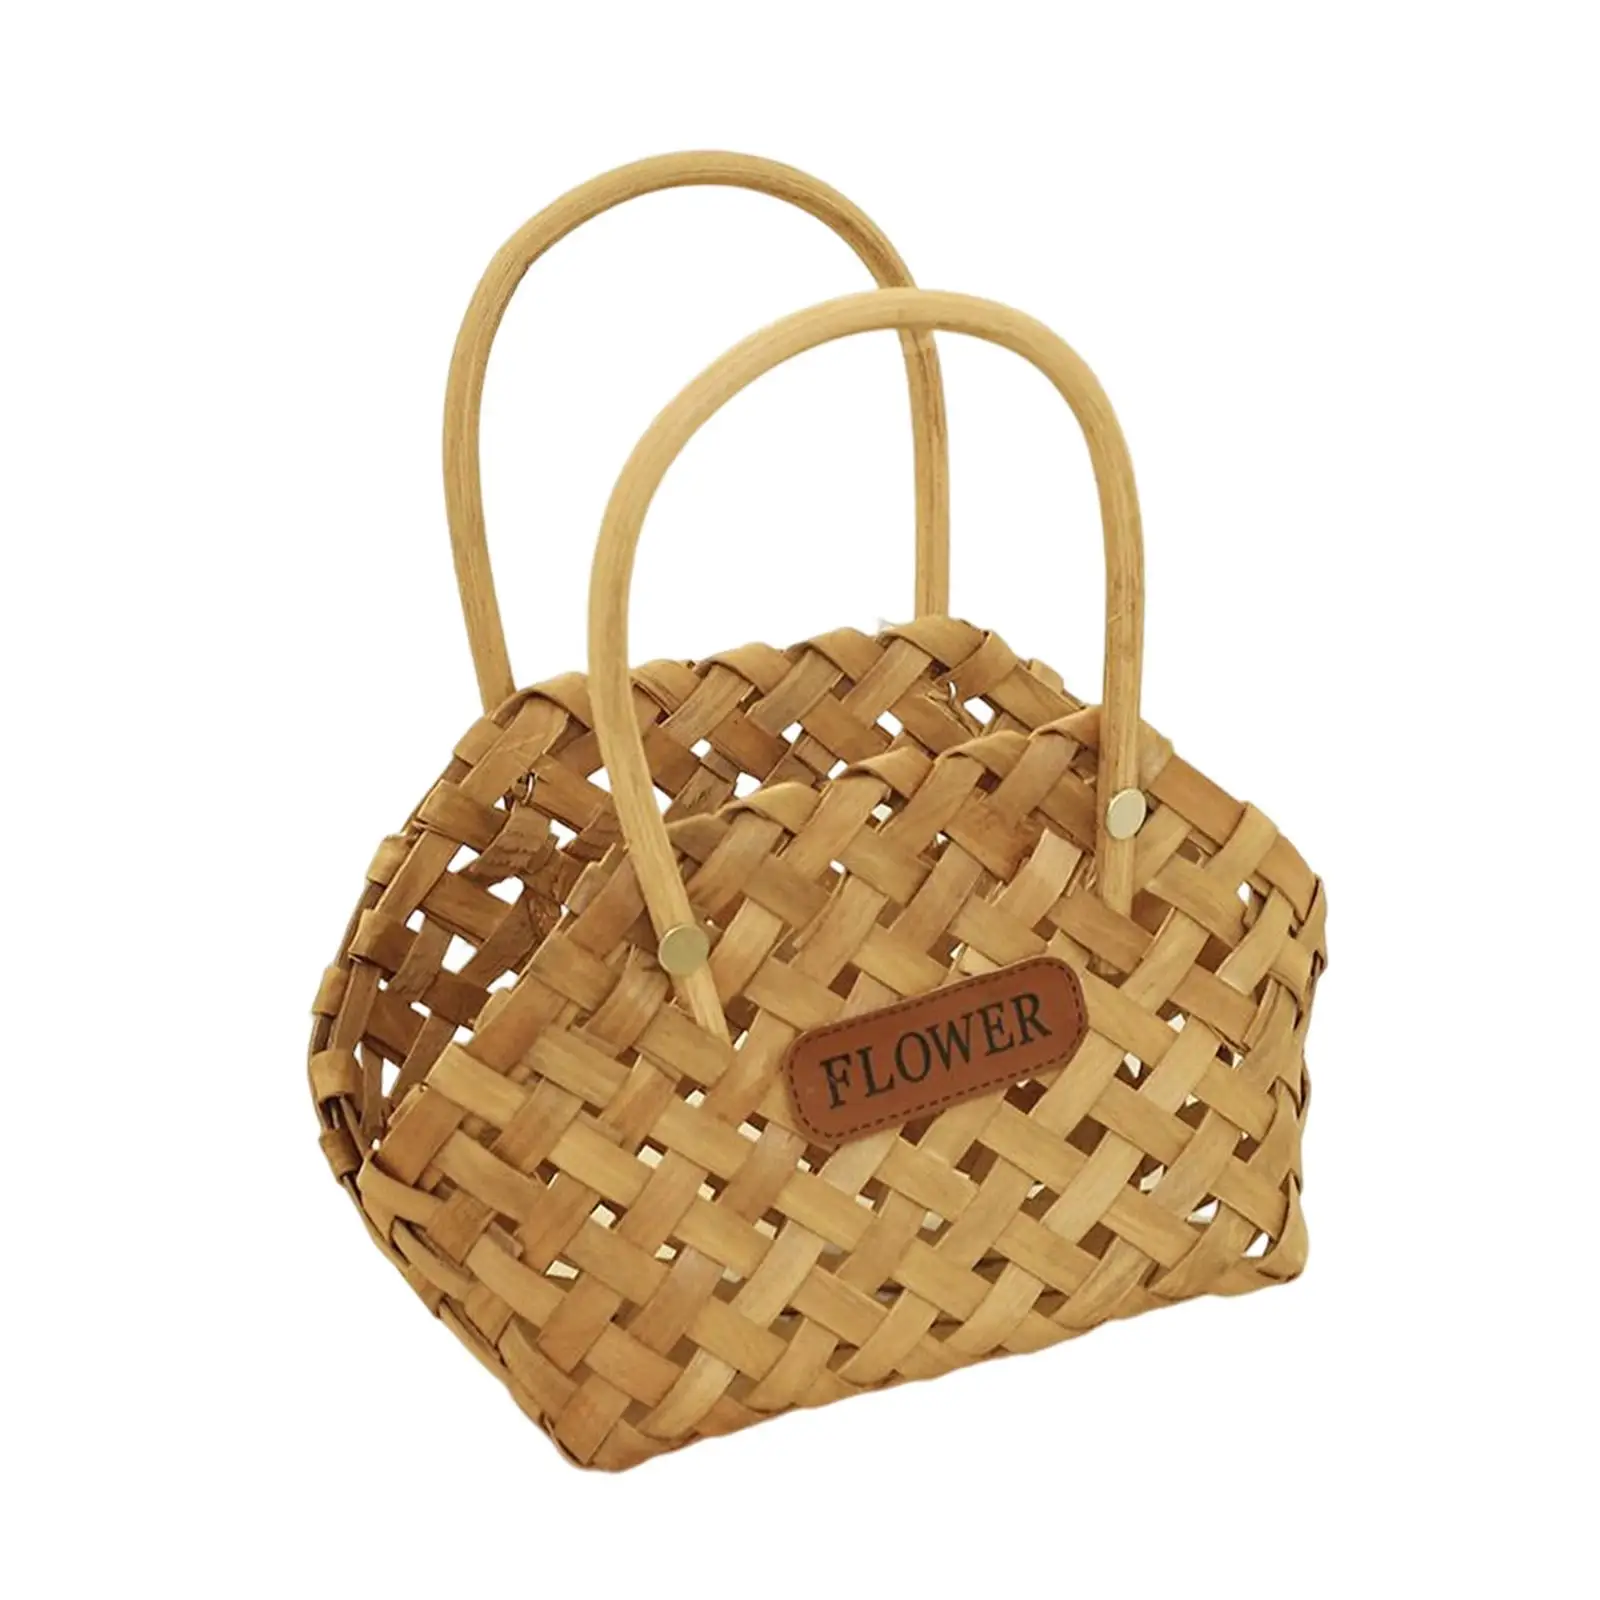 Woven Flower Basket Gift Basket Empty to Fill Wooden Woven Basket for Storage Wood Chip Picnic Basket for Wedding Flower Pantry images - 6